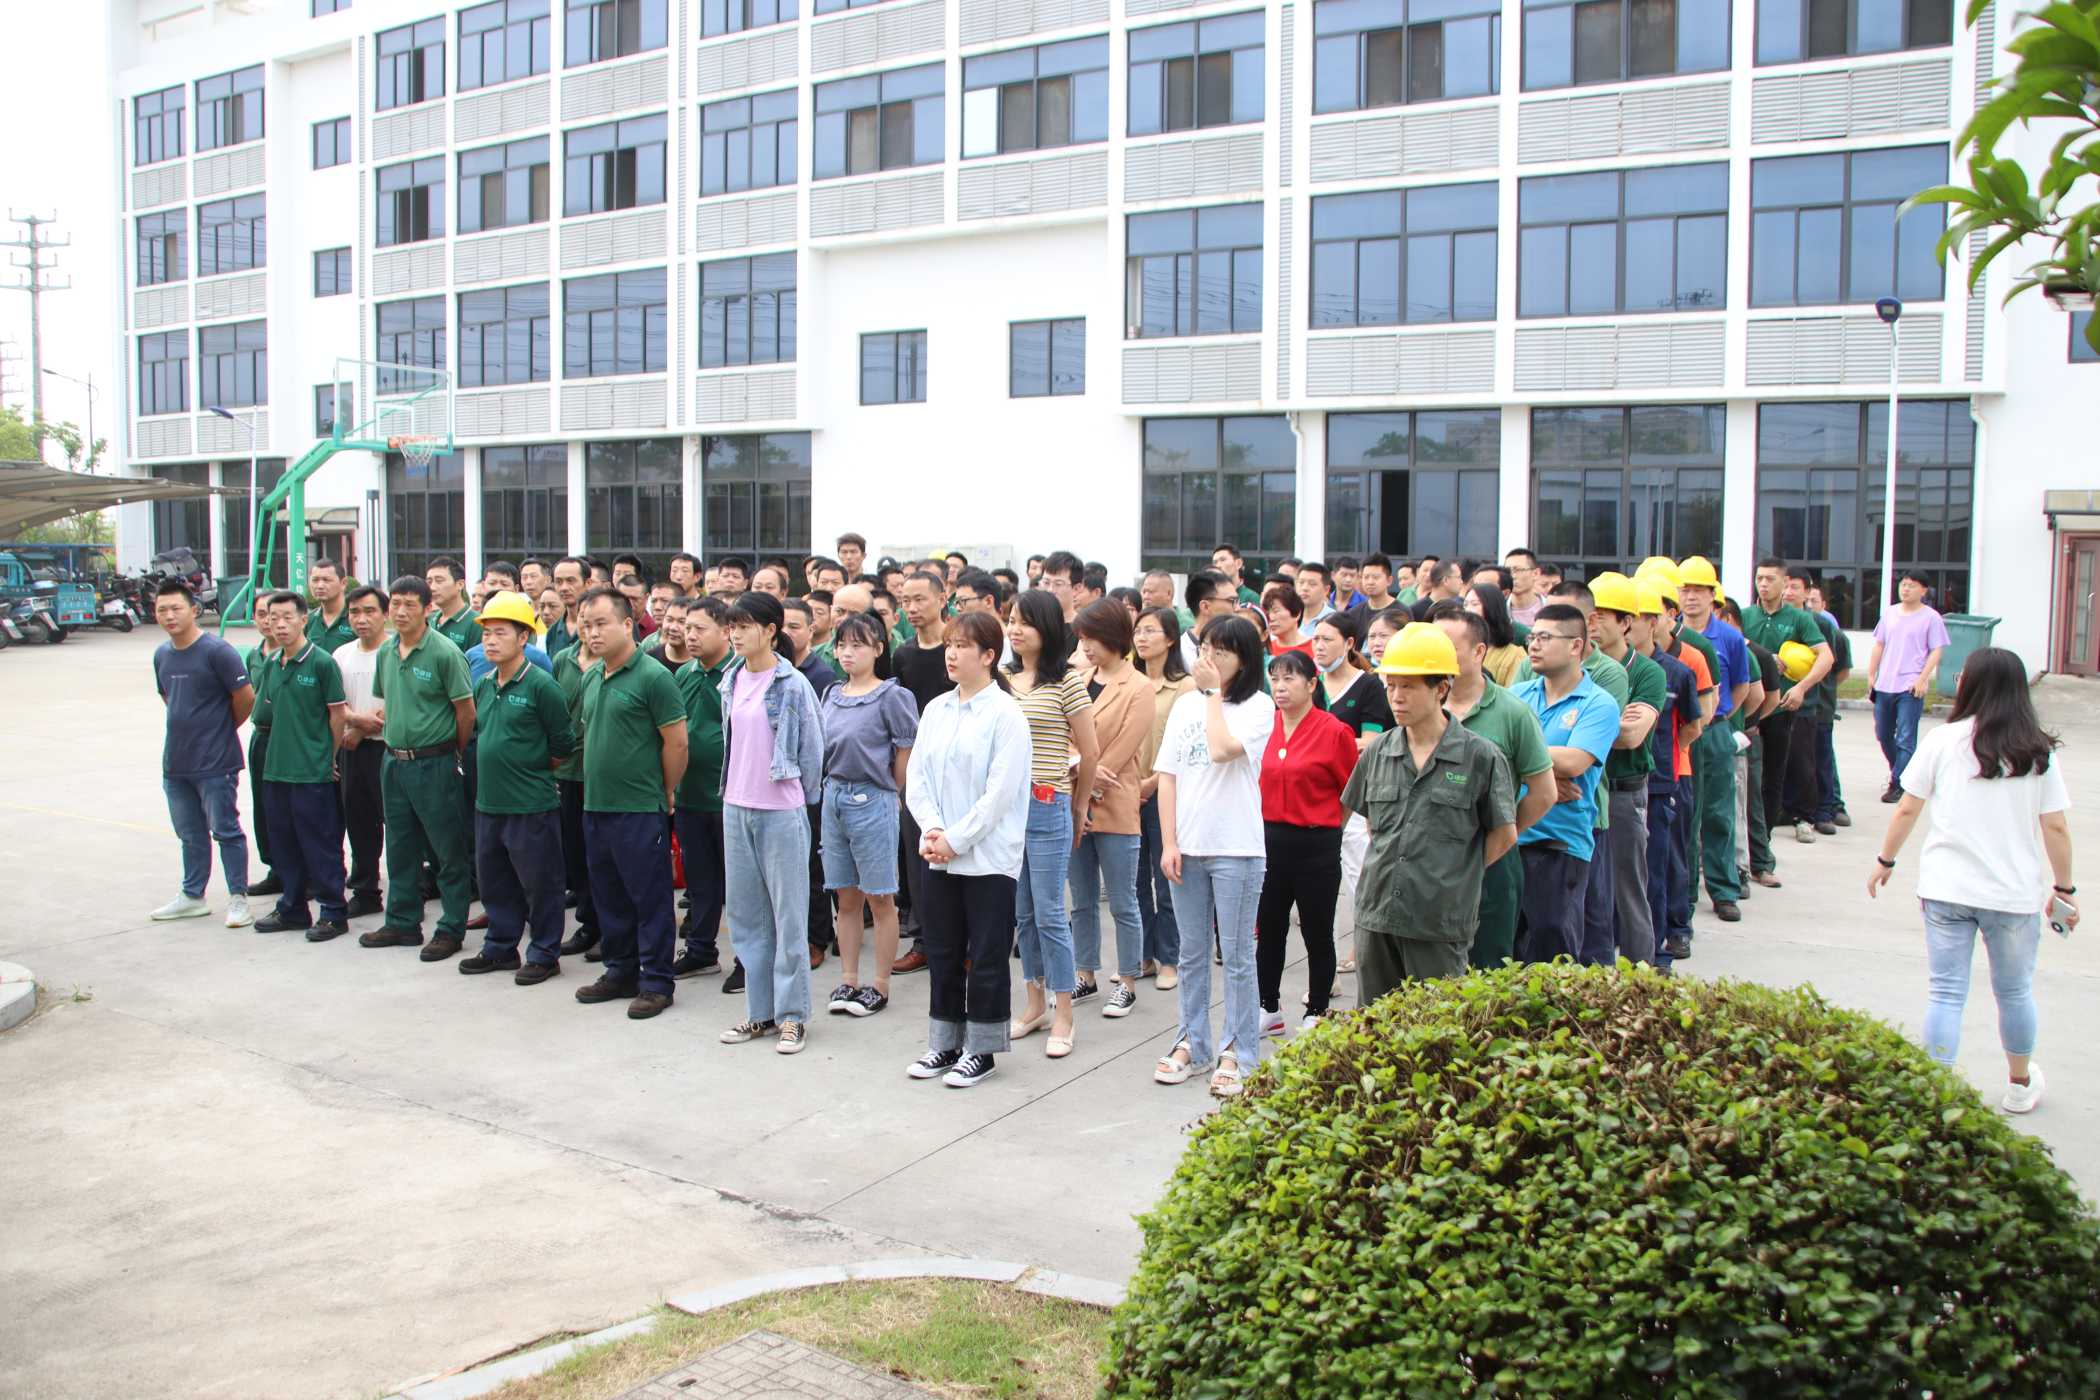 The company held an all-staff safety morning meeting